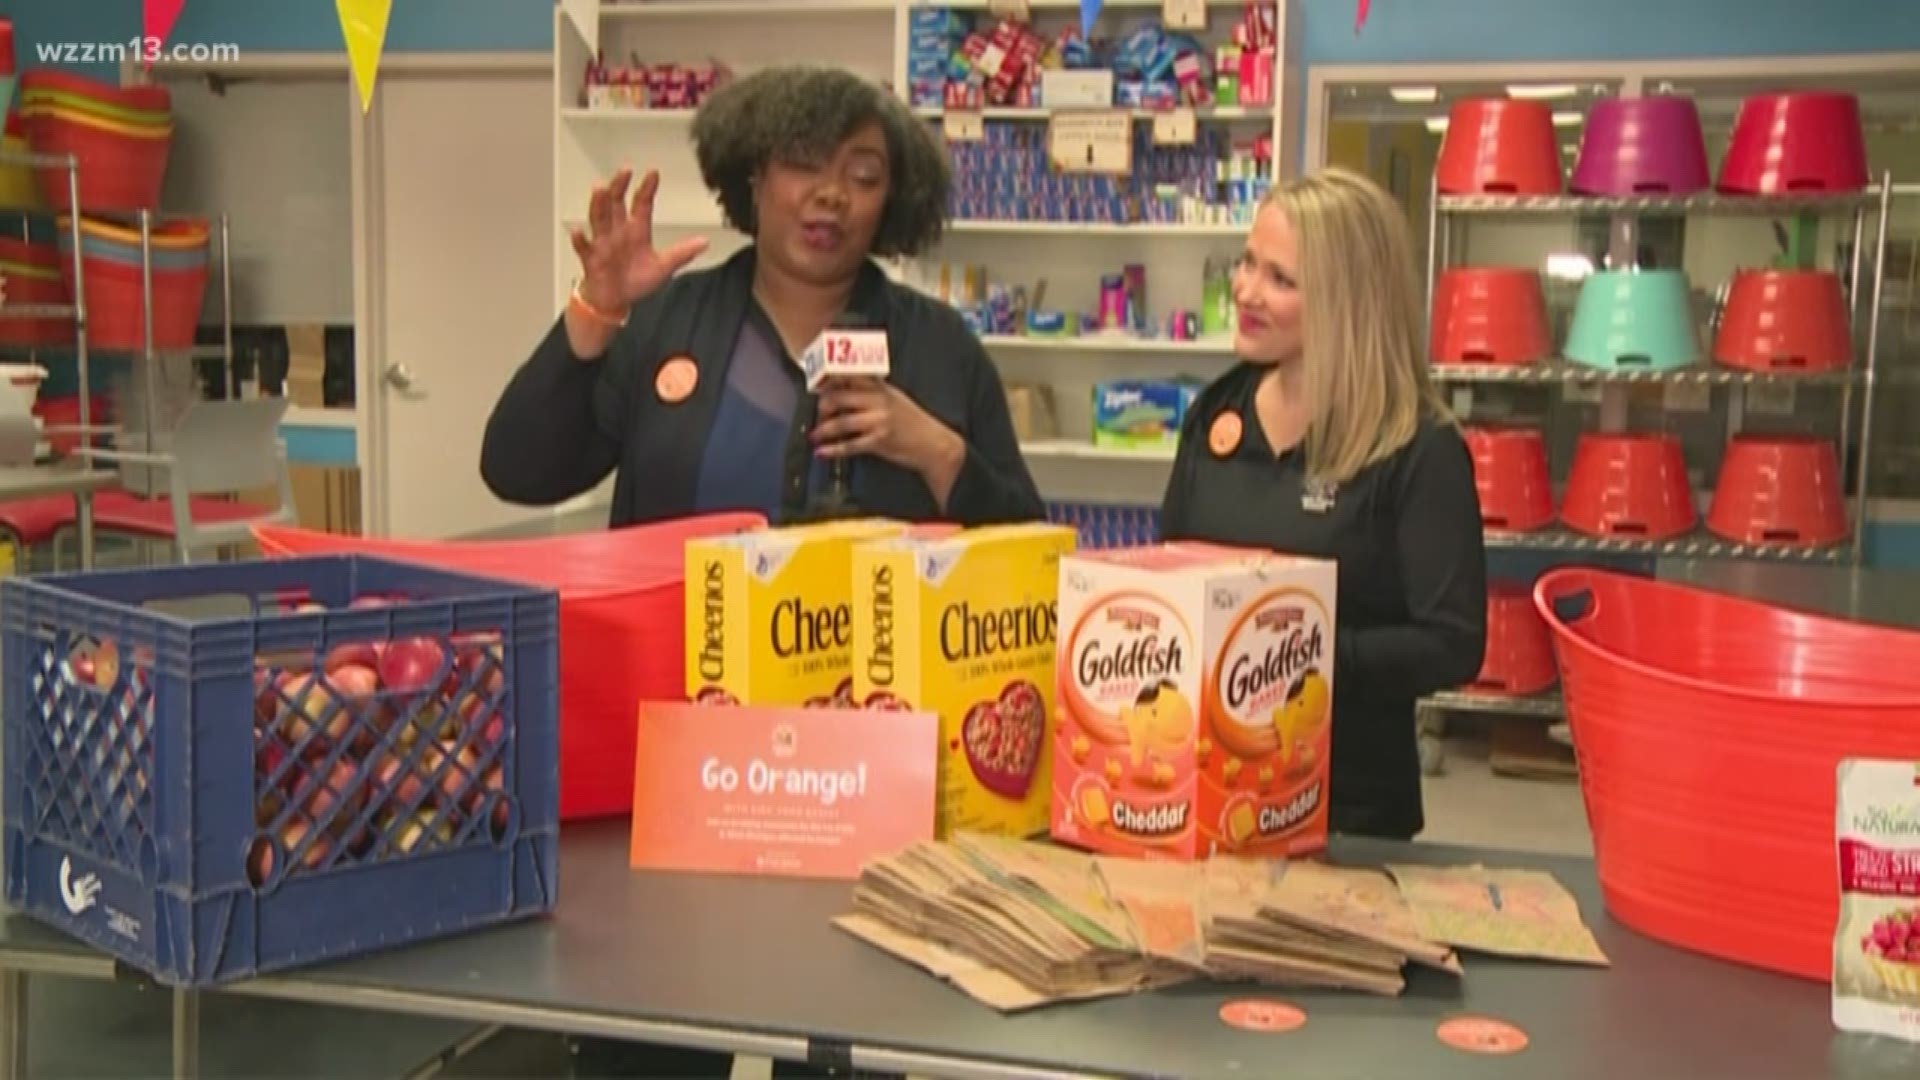 Local non-profit, Kids' Food Basket, is leading the charge to fight childhood hunger in West Michigan.